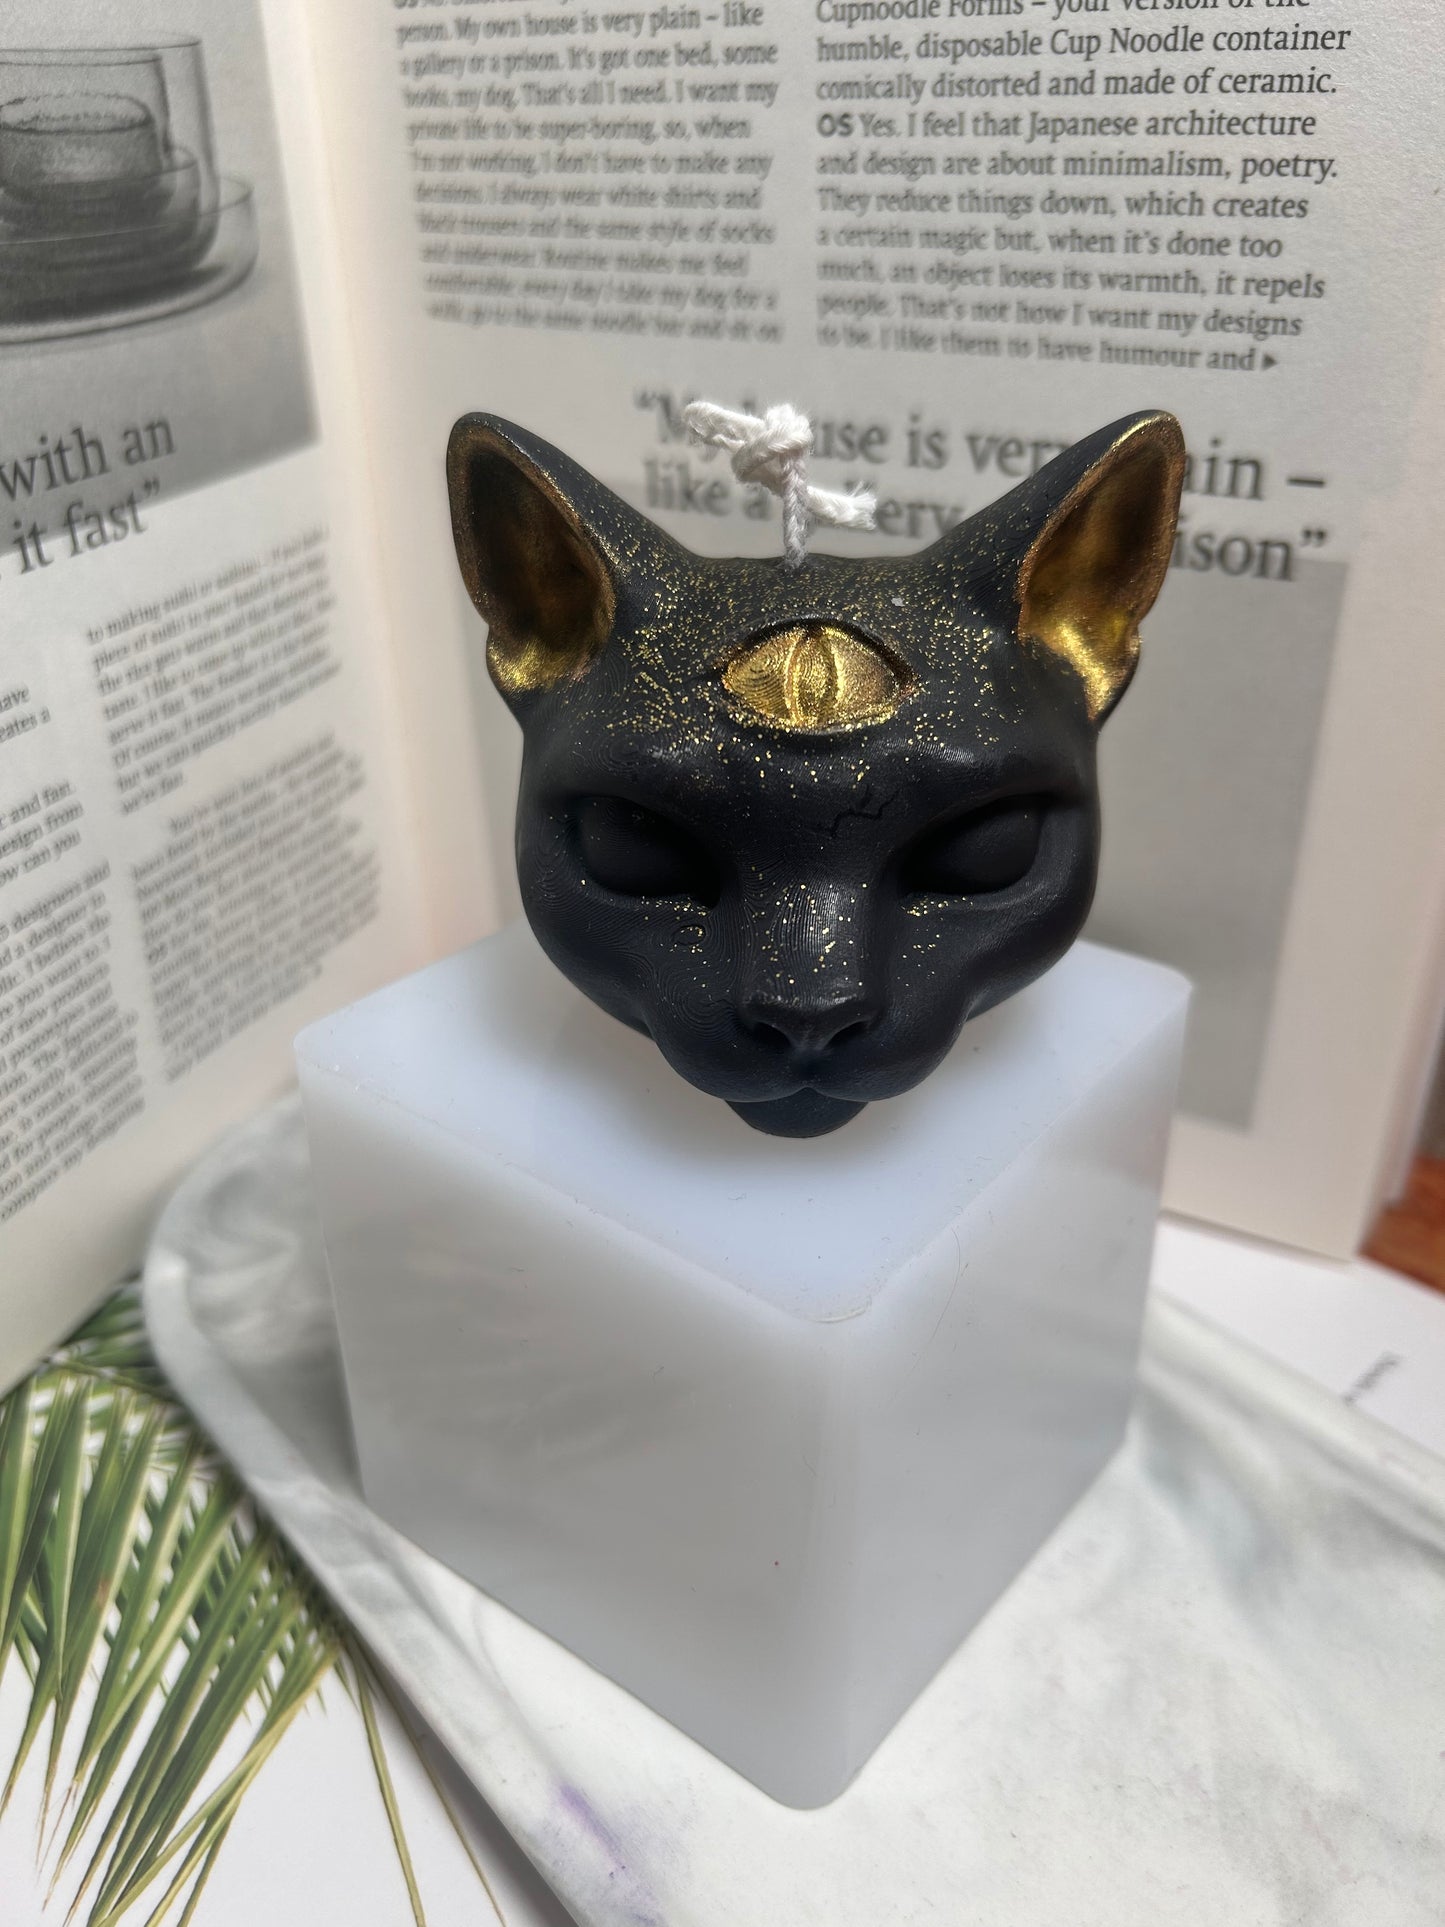 Handcrafted Low-Temperature Candle - Mighty Bastet